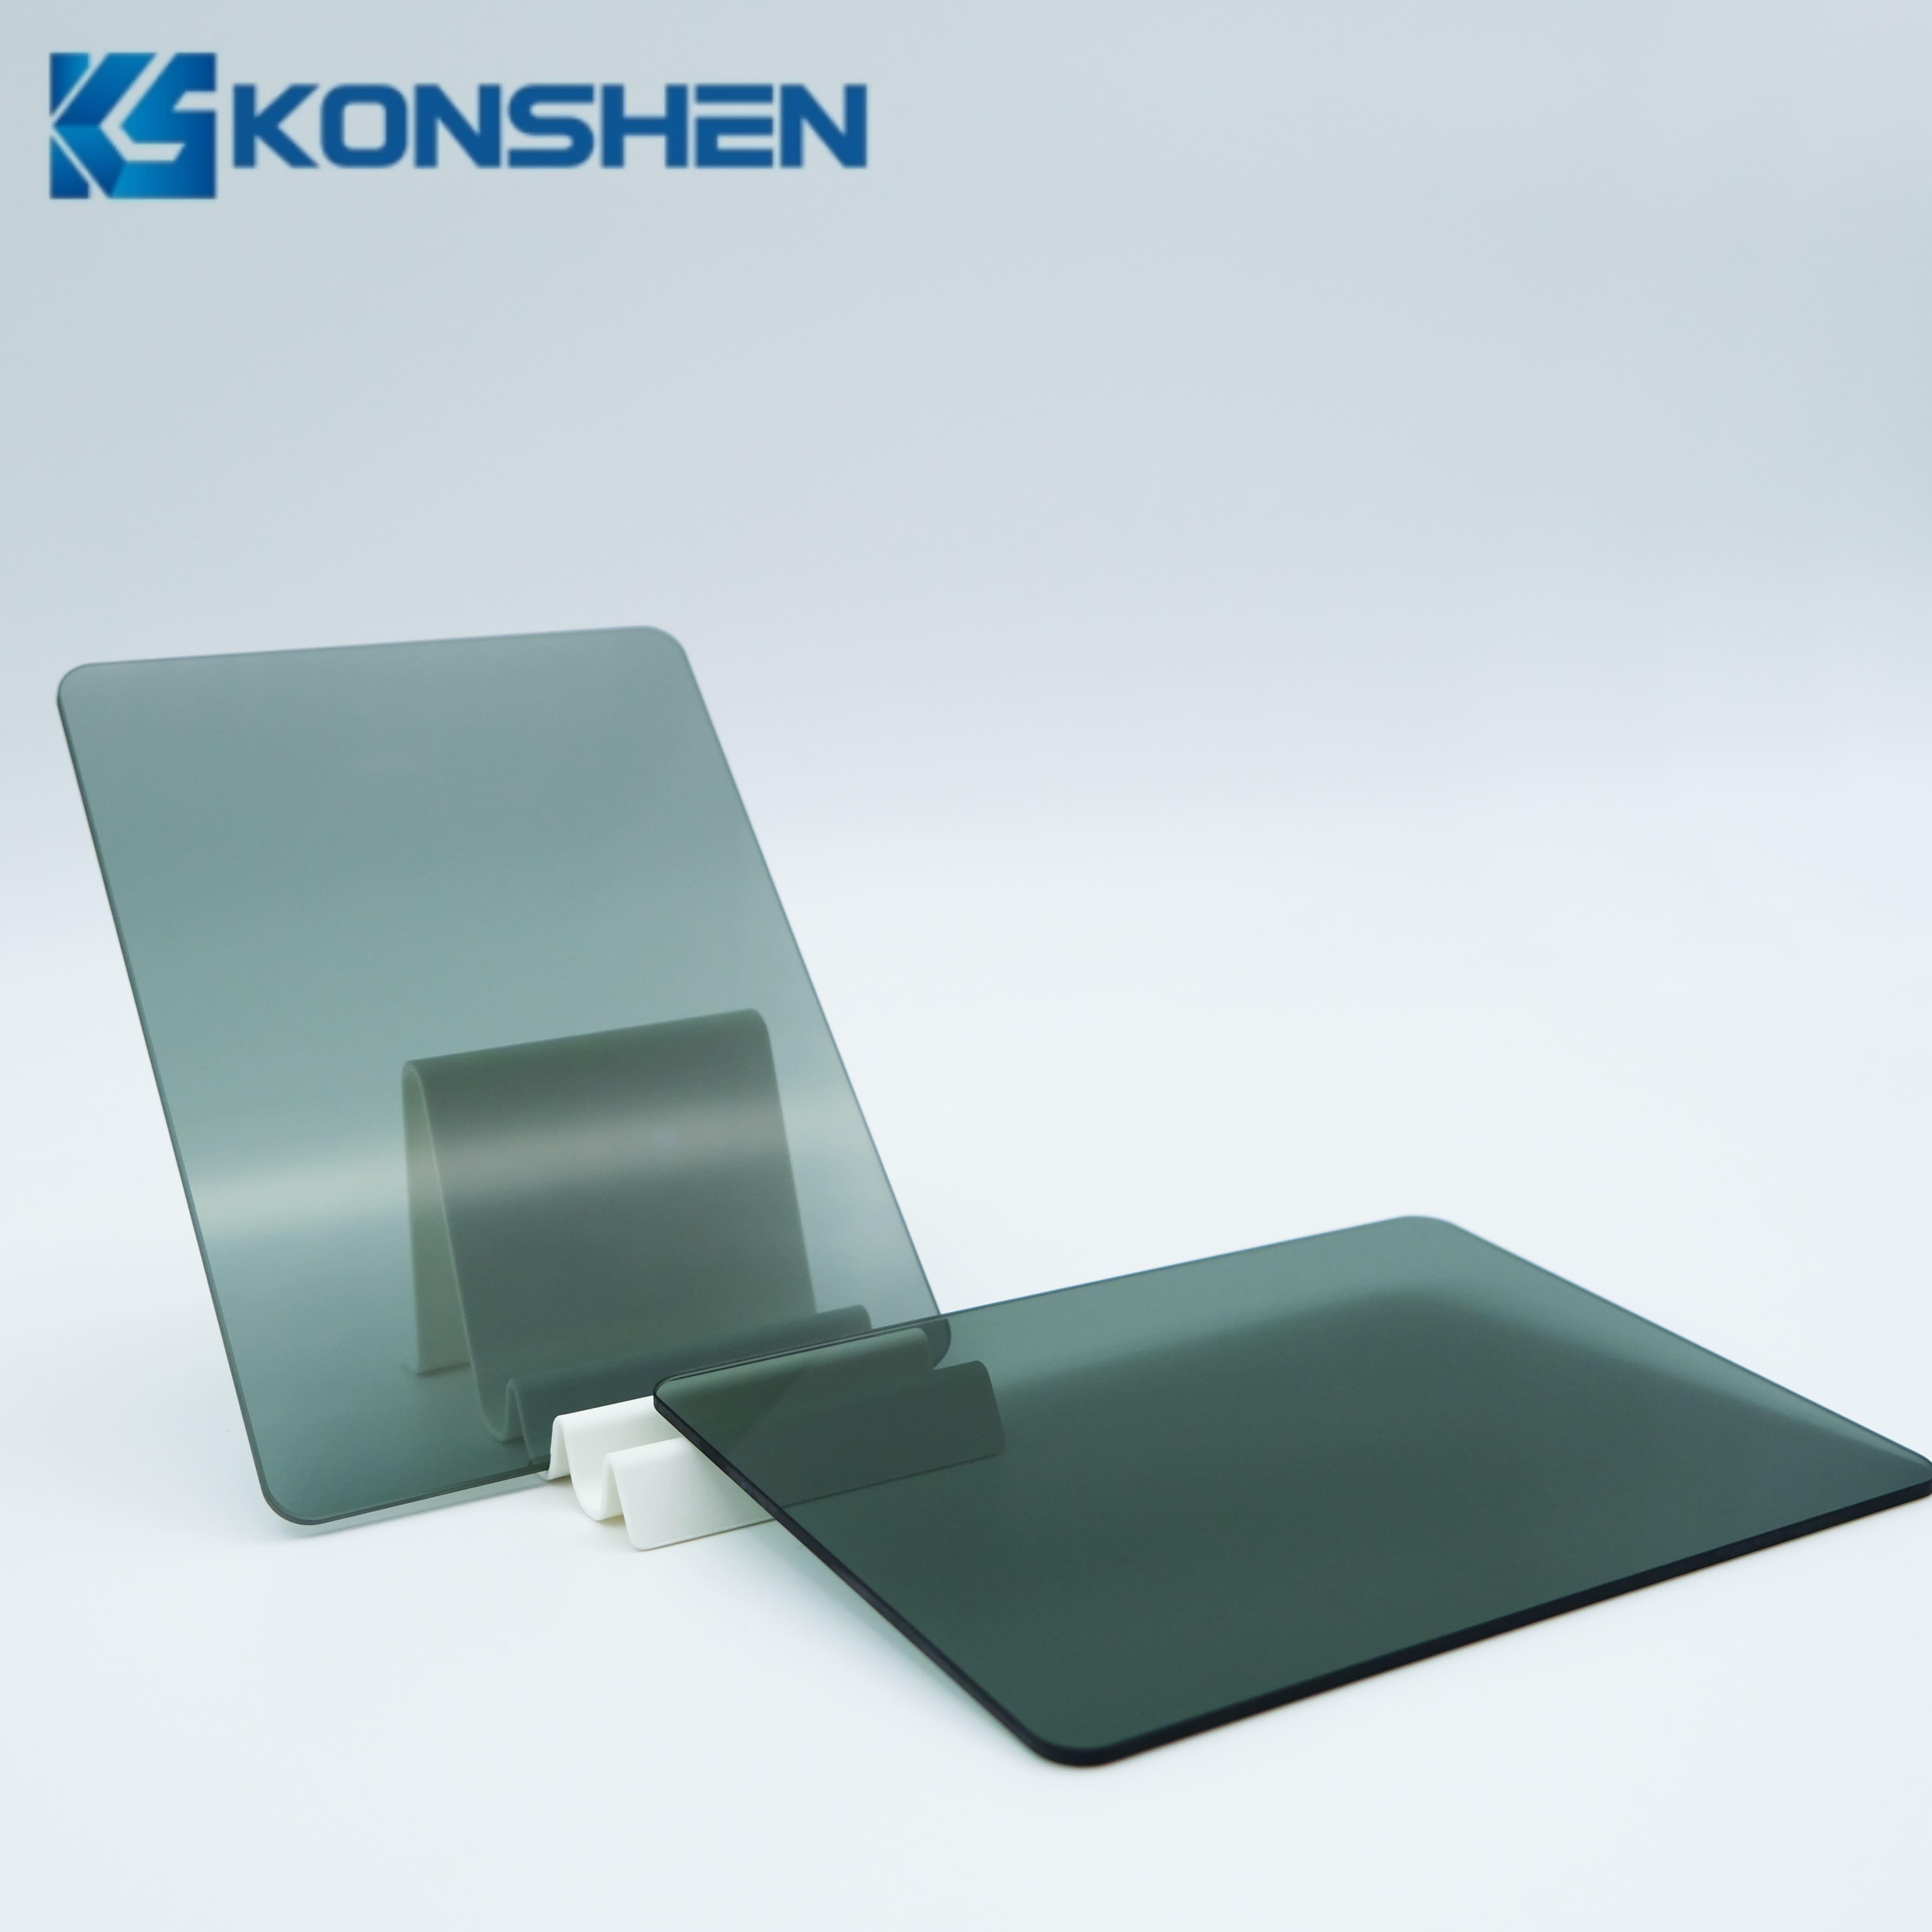 AG Coated Display Cover Glass Temper Panel